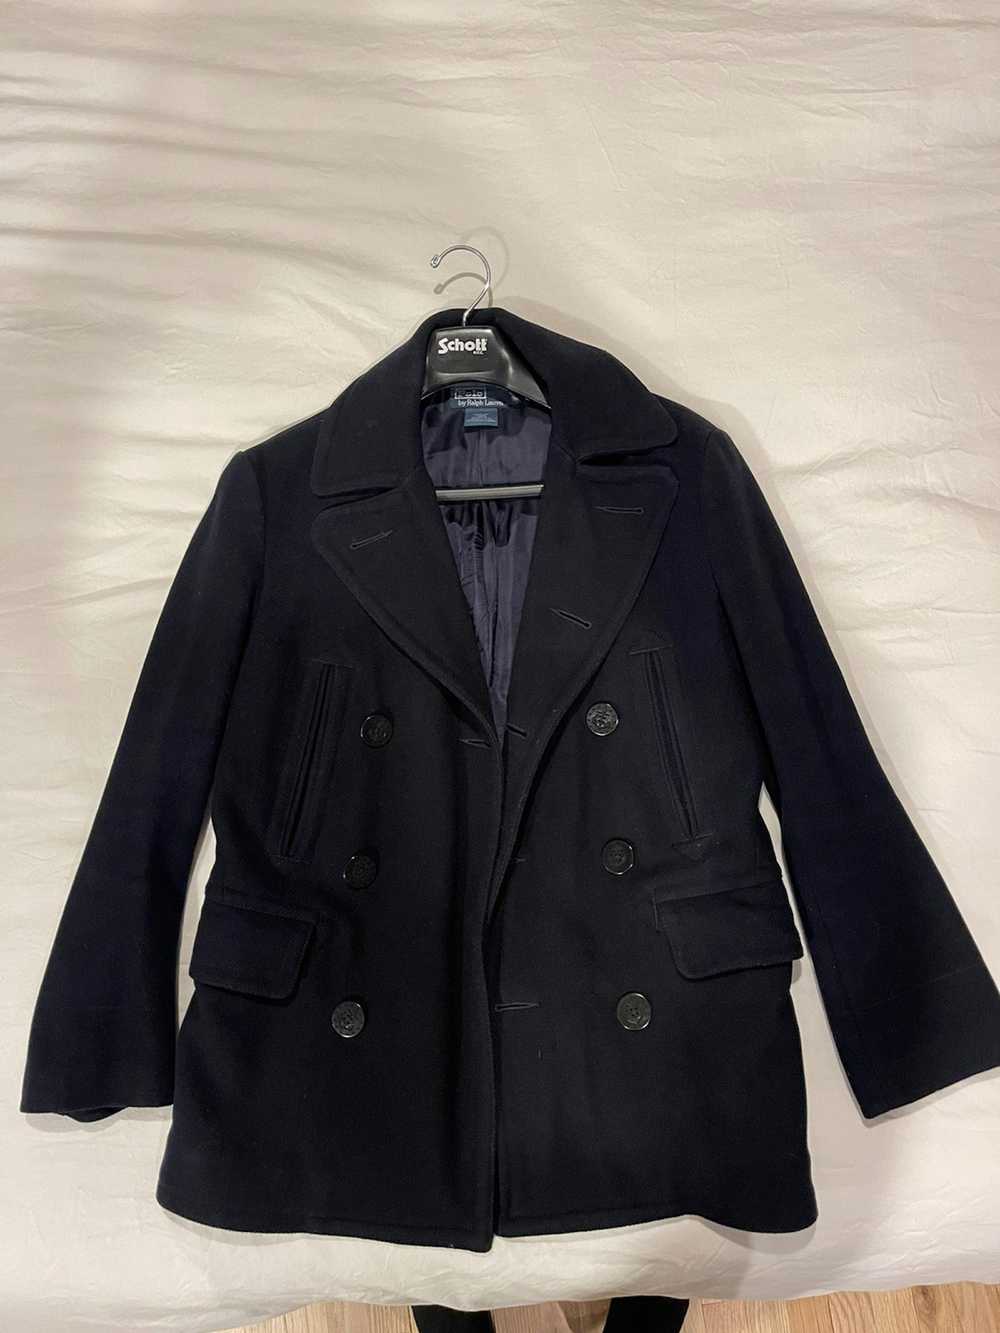 Polo Ralph Lauren Double Breasted Wool Peacoat - image 4